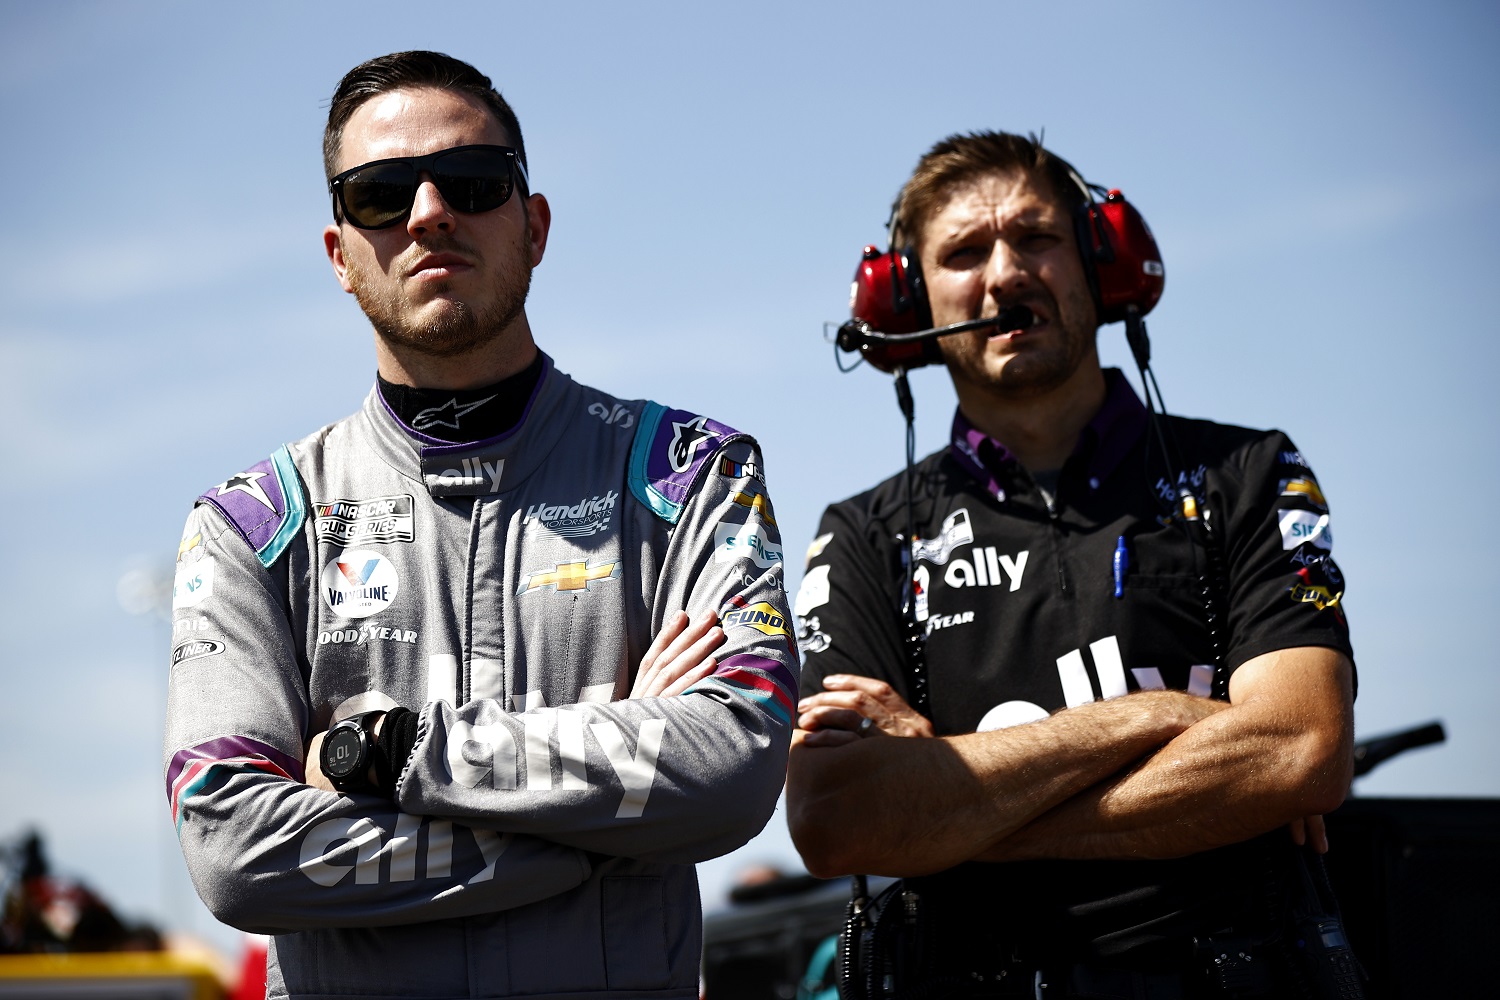 Alex Bowman, driver of the No. 48 Chevrolet, and crew chief Greg Ives look on during qualifying for the NASCAR Cup Series Ally 400 at Nashville Superspeedway on June 20, 2021. | Jared C. Tilton/Getty Images